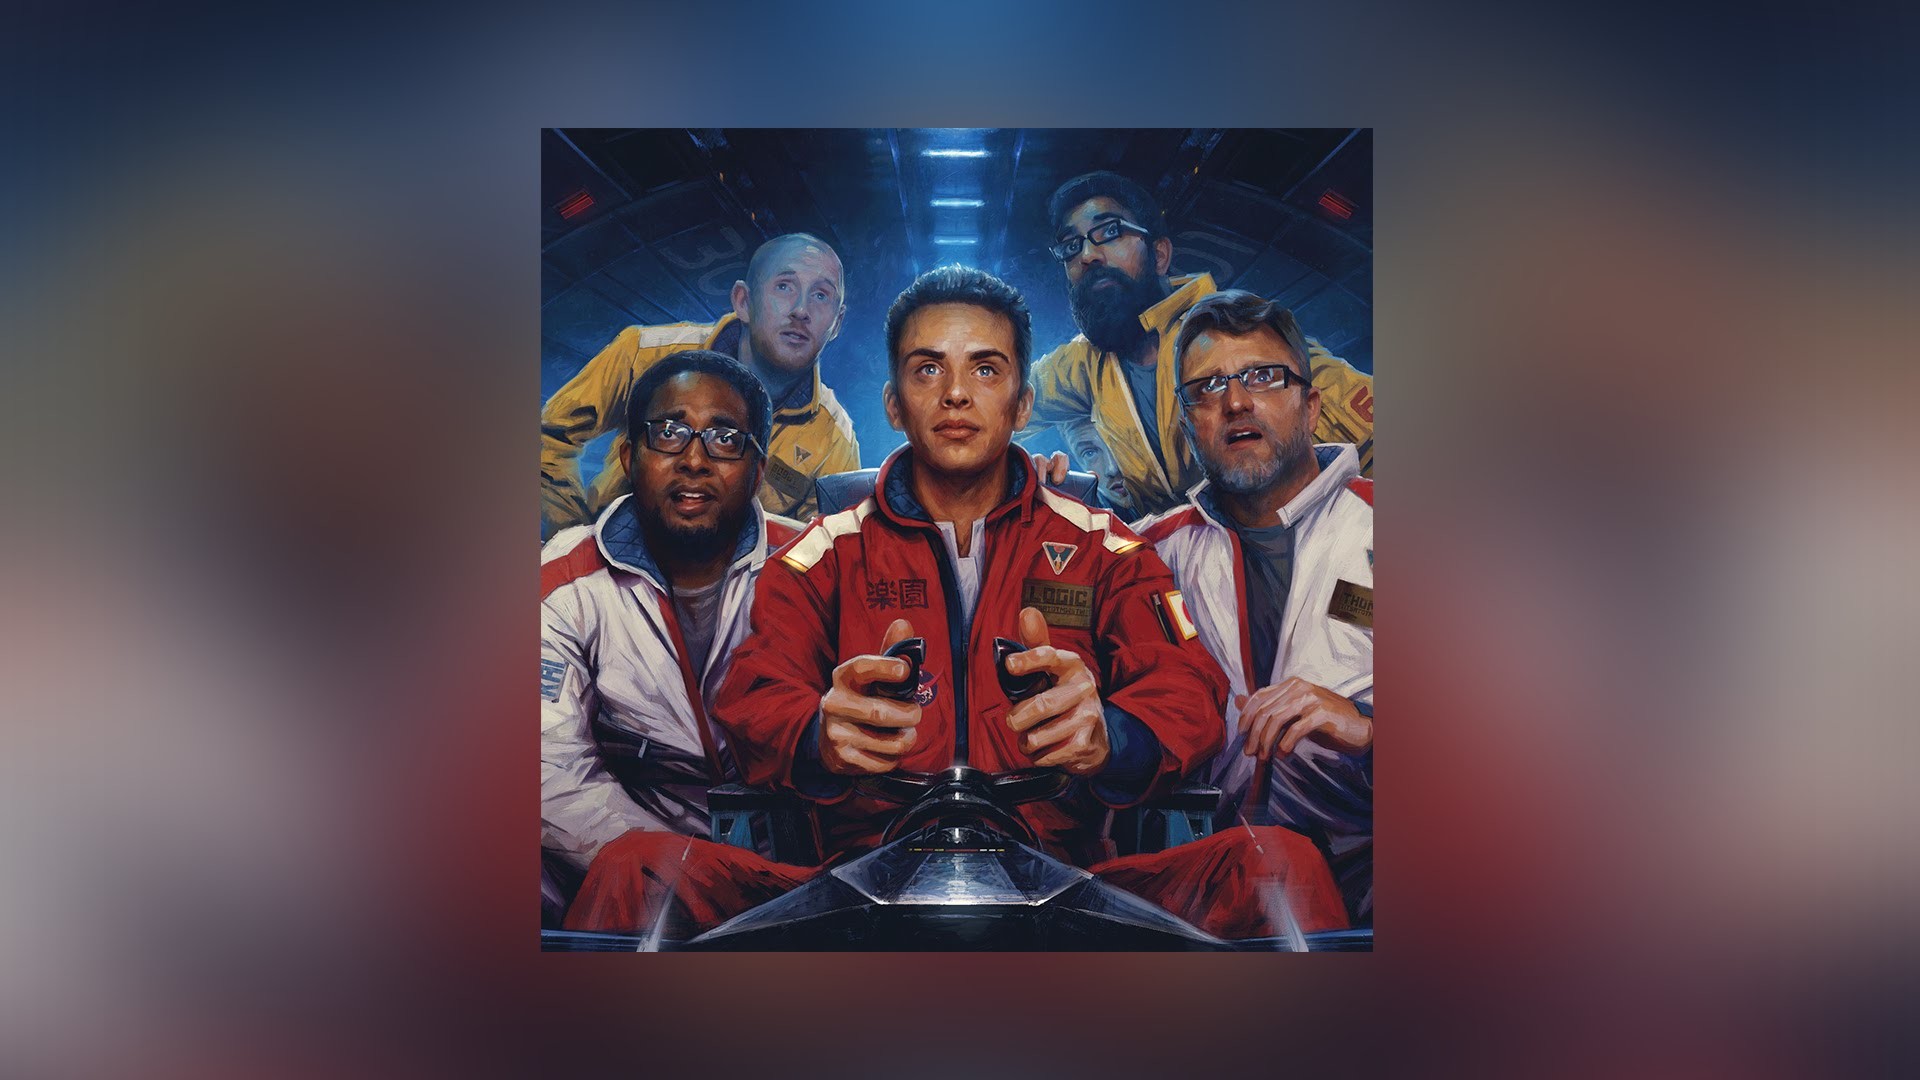 1920x1080 I've made a logic wallpaper featuring his mixtape and album covers .